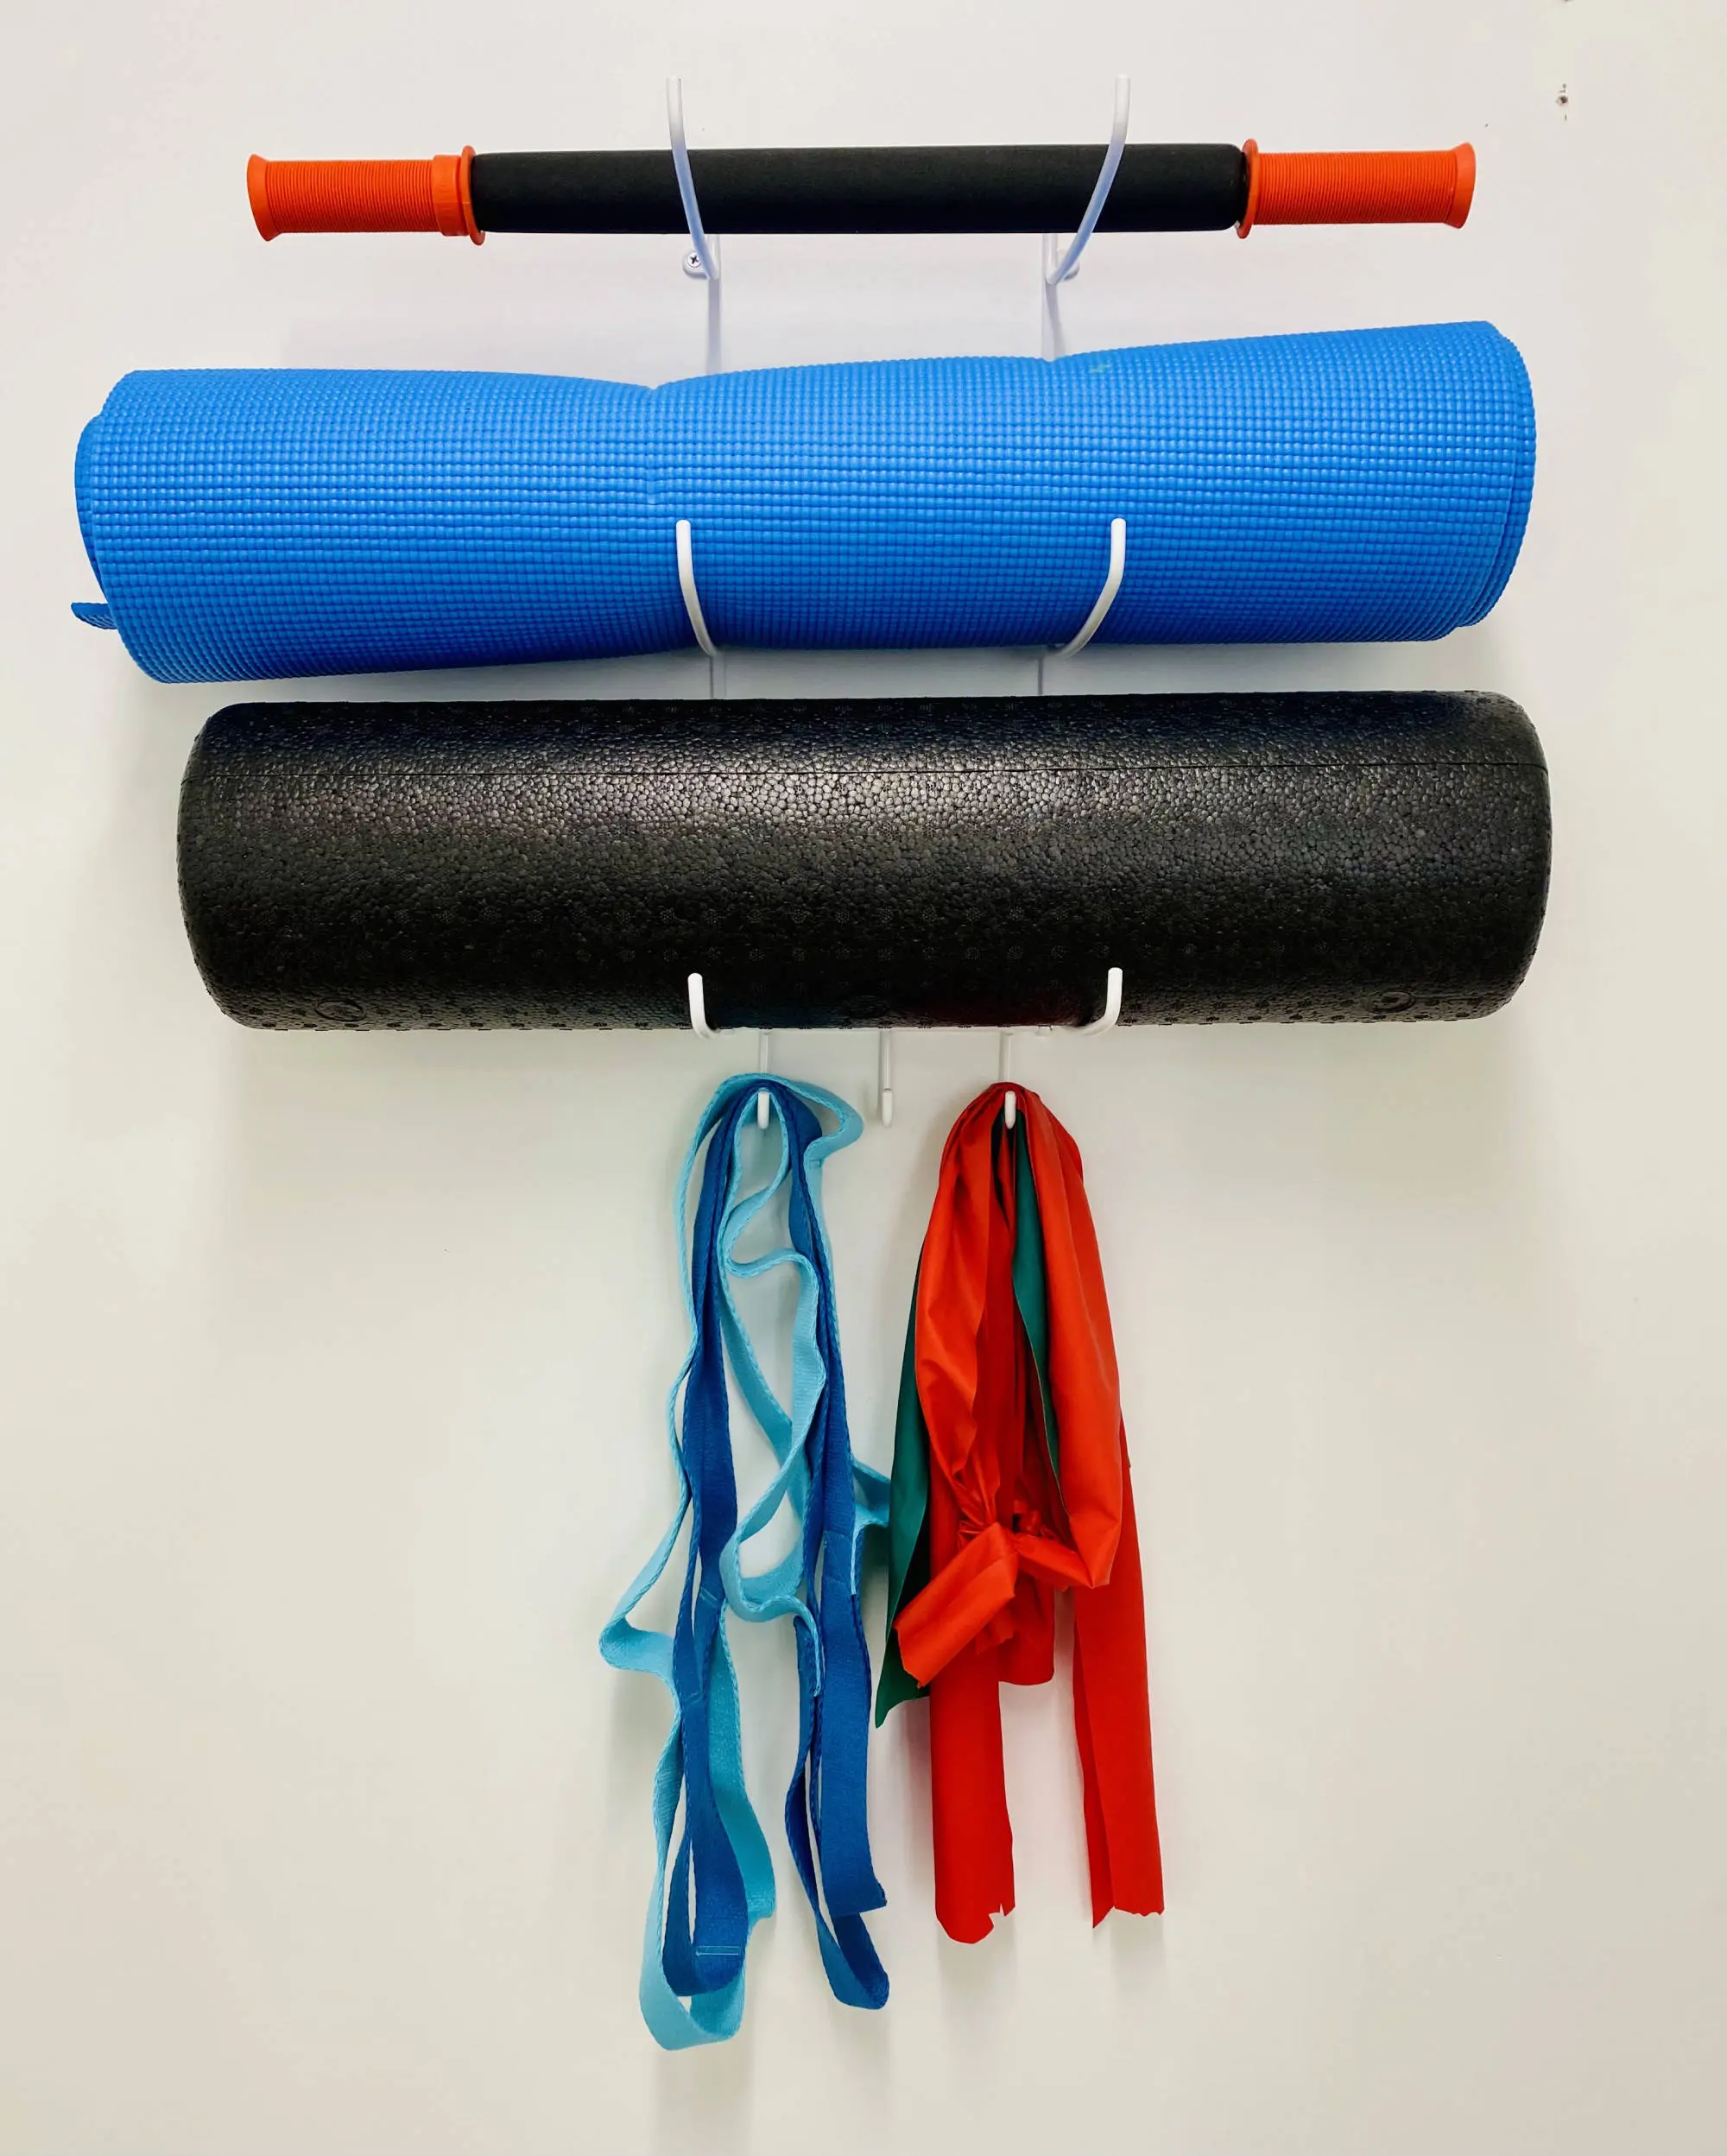 Foam roller and Theraband